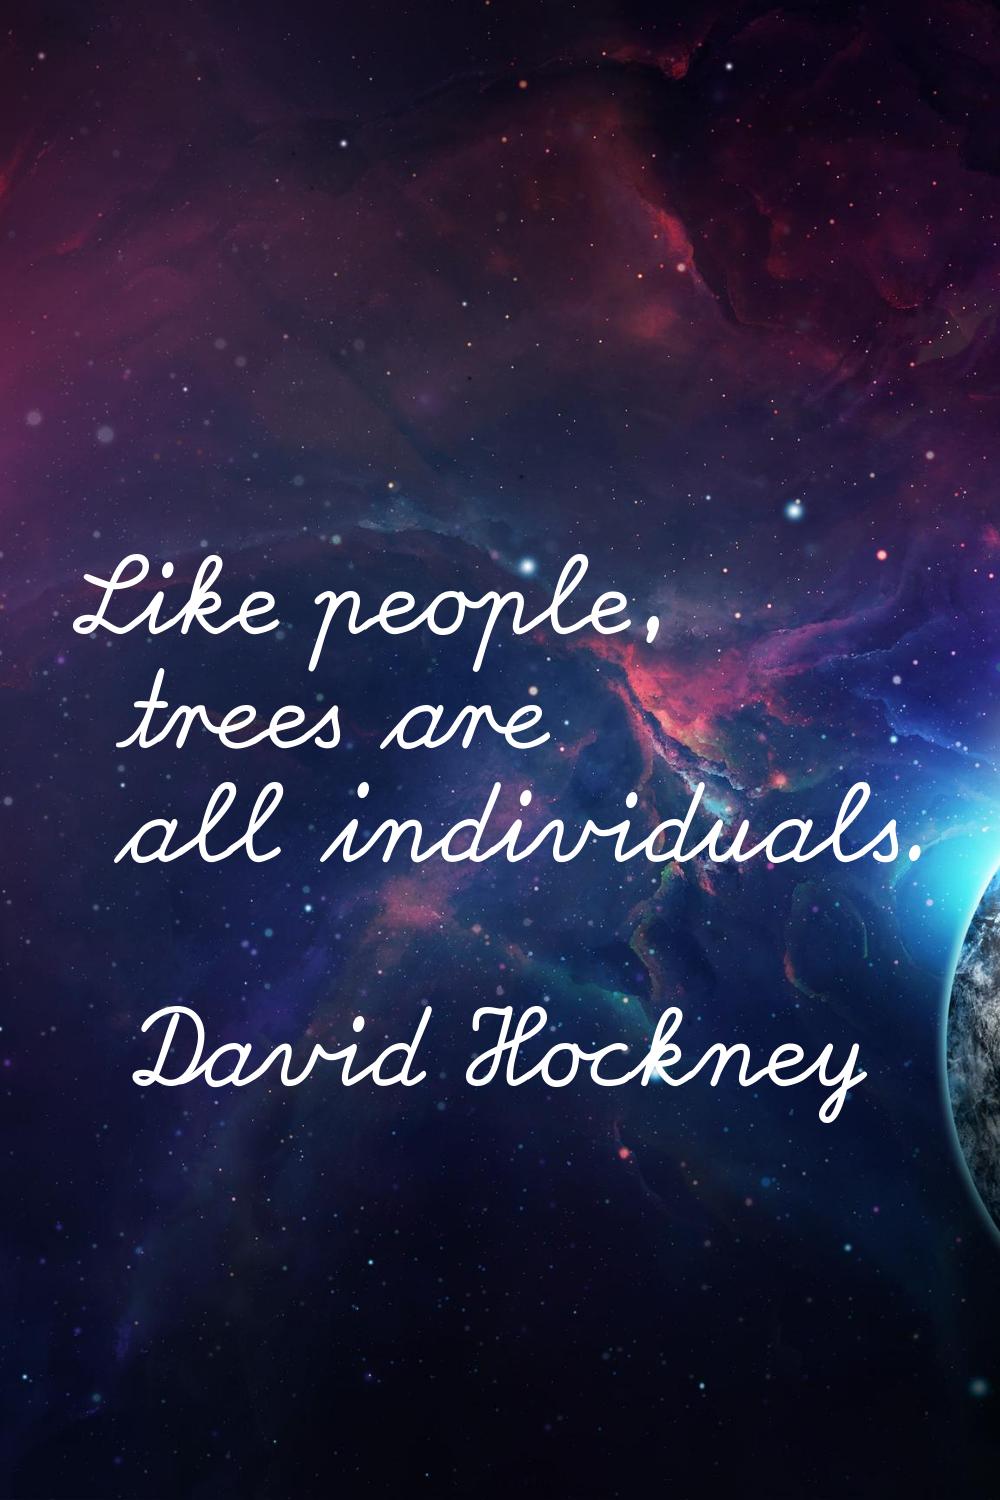 Like people, trees are all individuals.